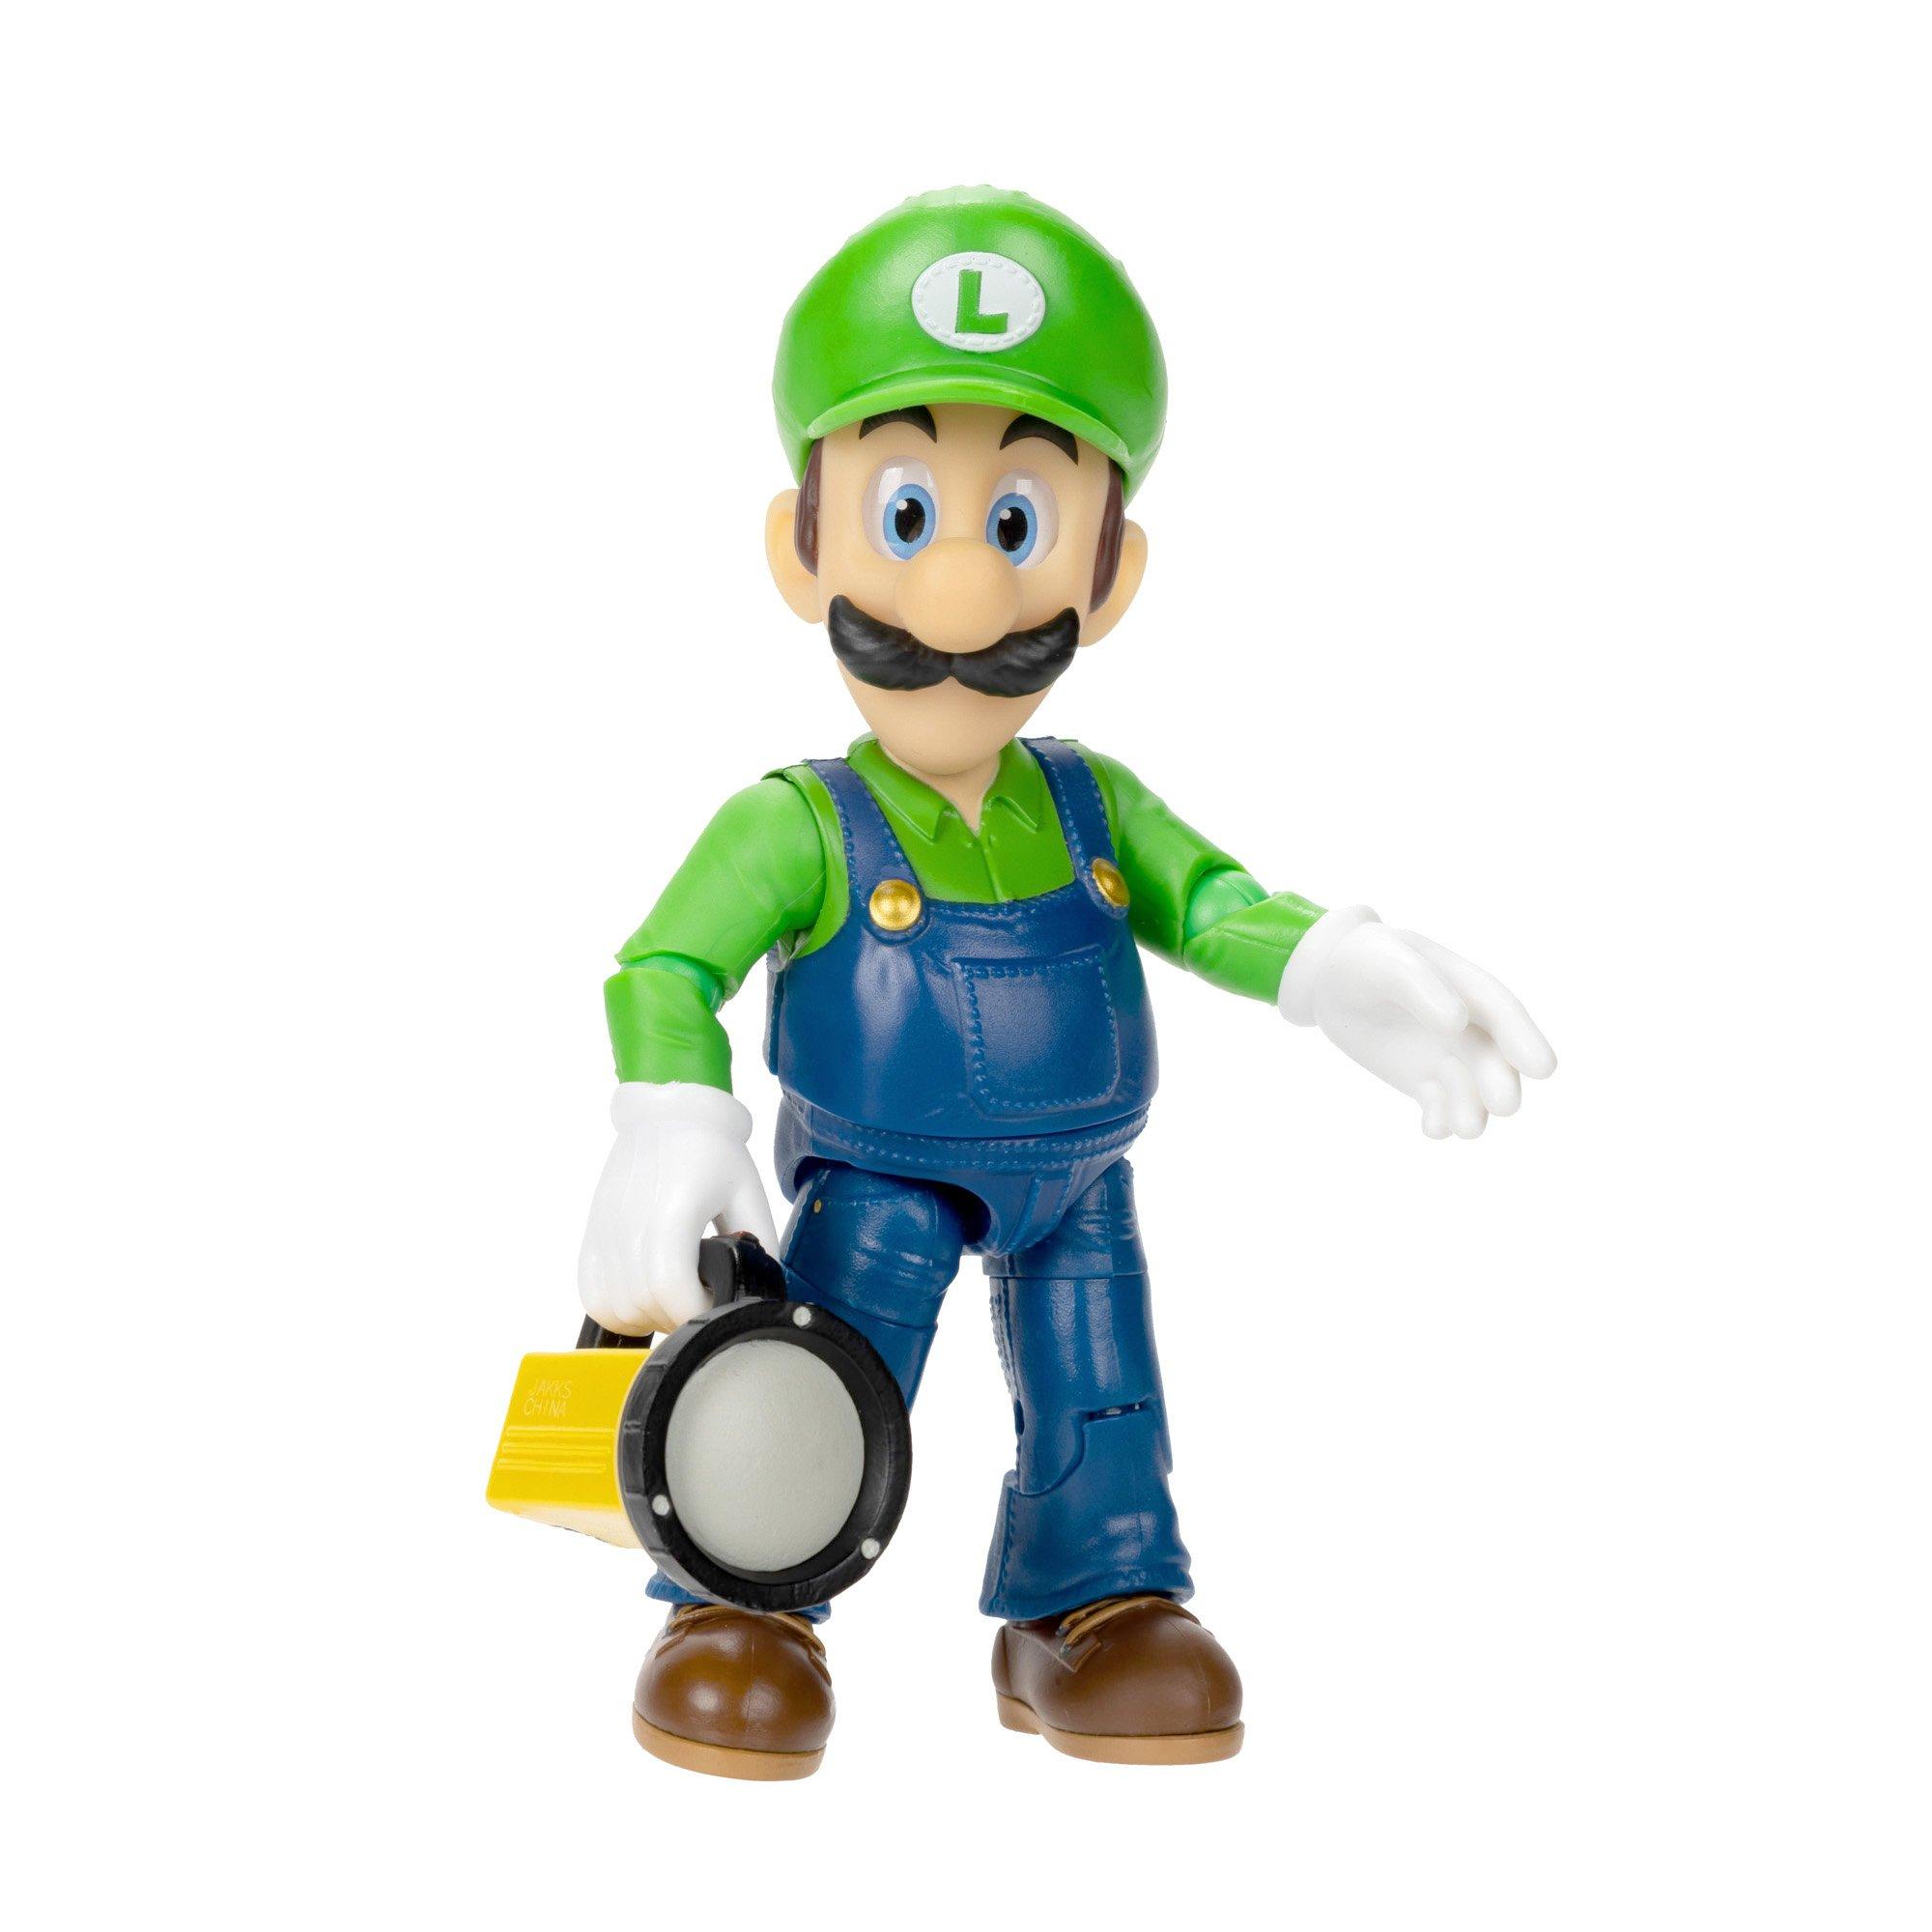 New Super Mario Bros. Movie Toys Are Coming Soon